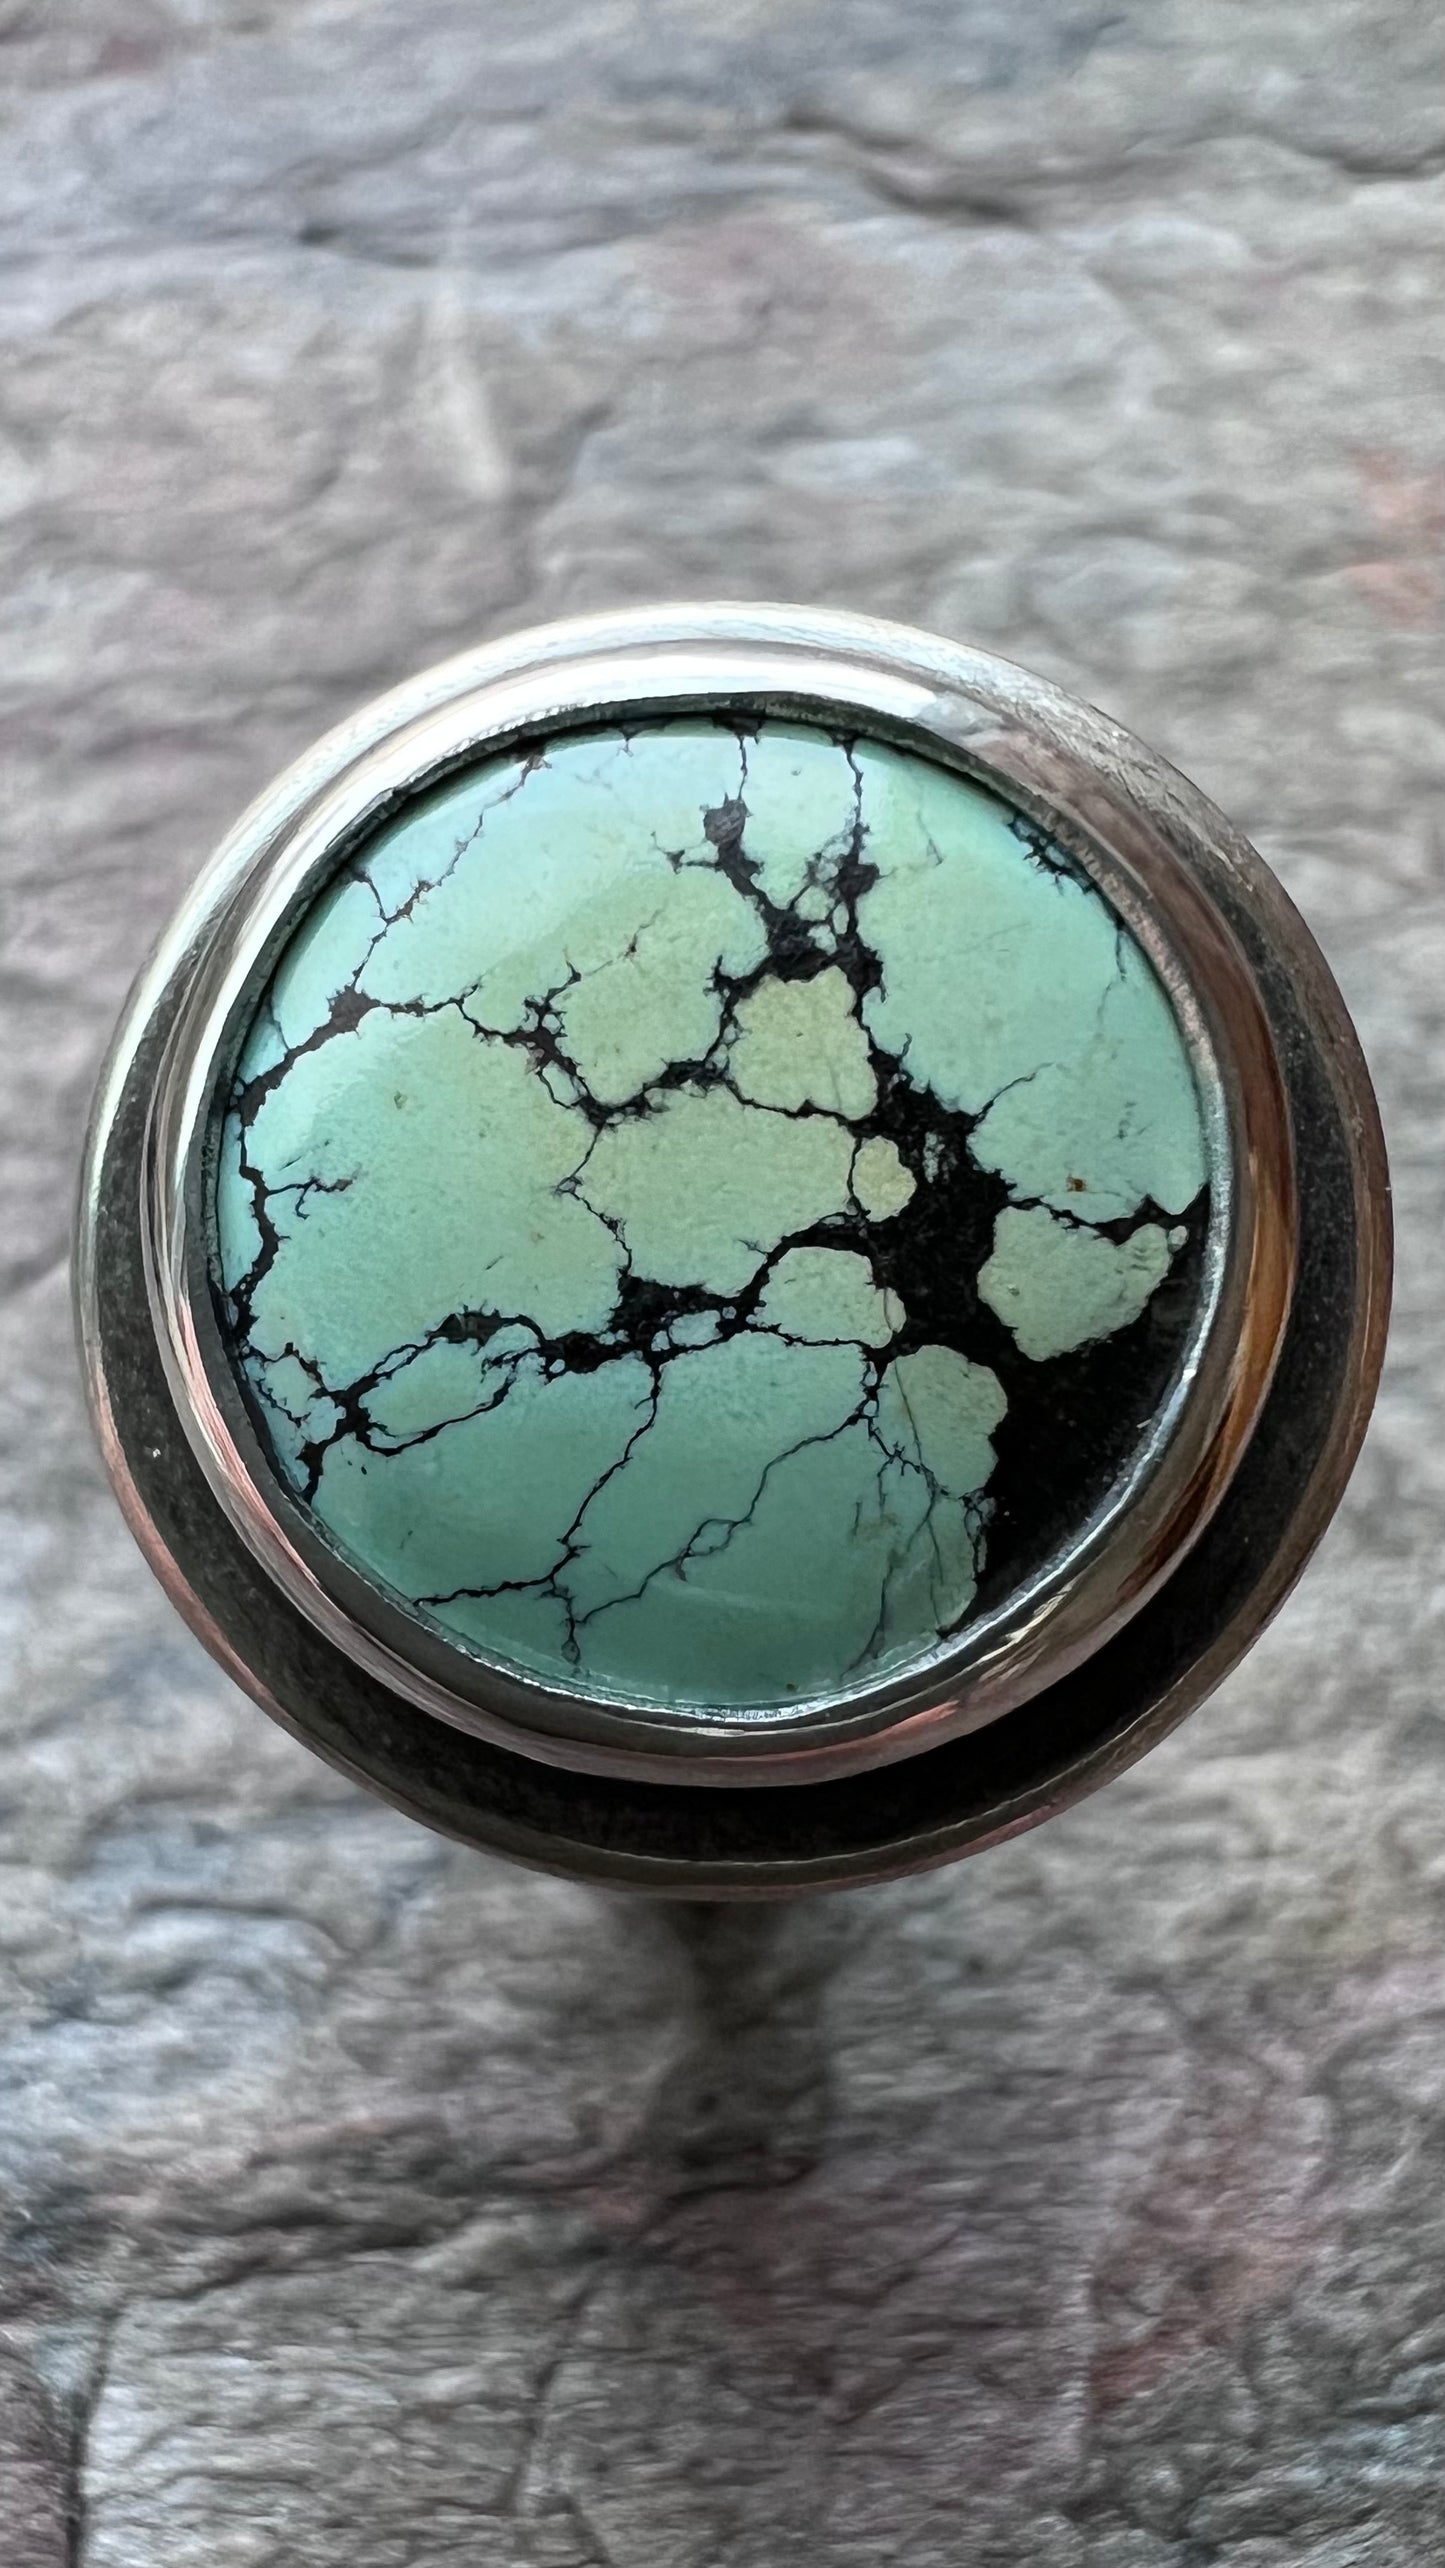 Turquoise Sterling Silver Ring - Handmade One-of-a-kind Genuine Turquoise Ring - Size 8.5